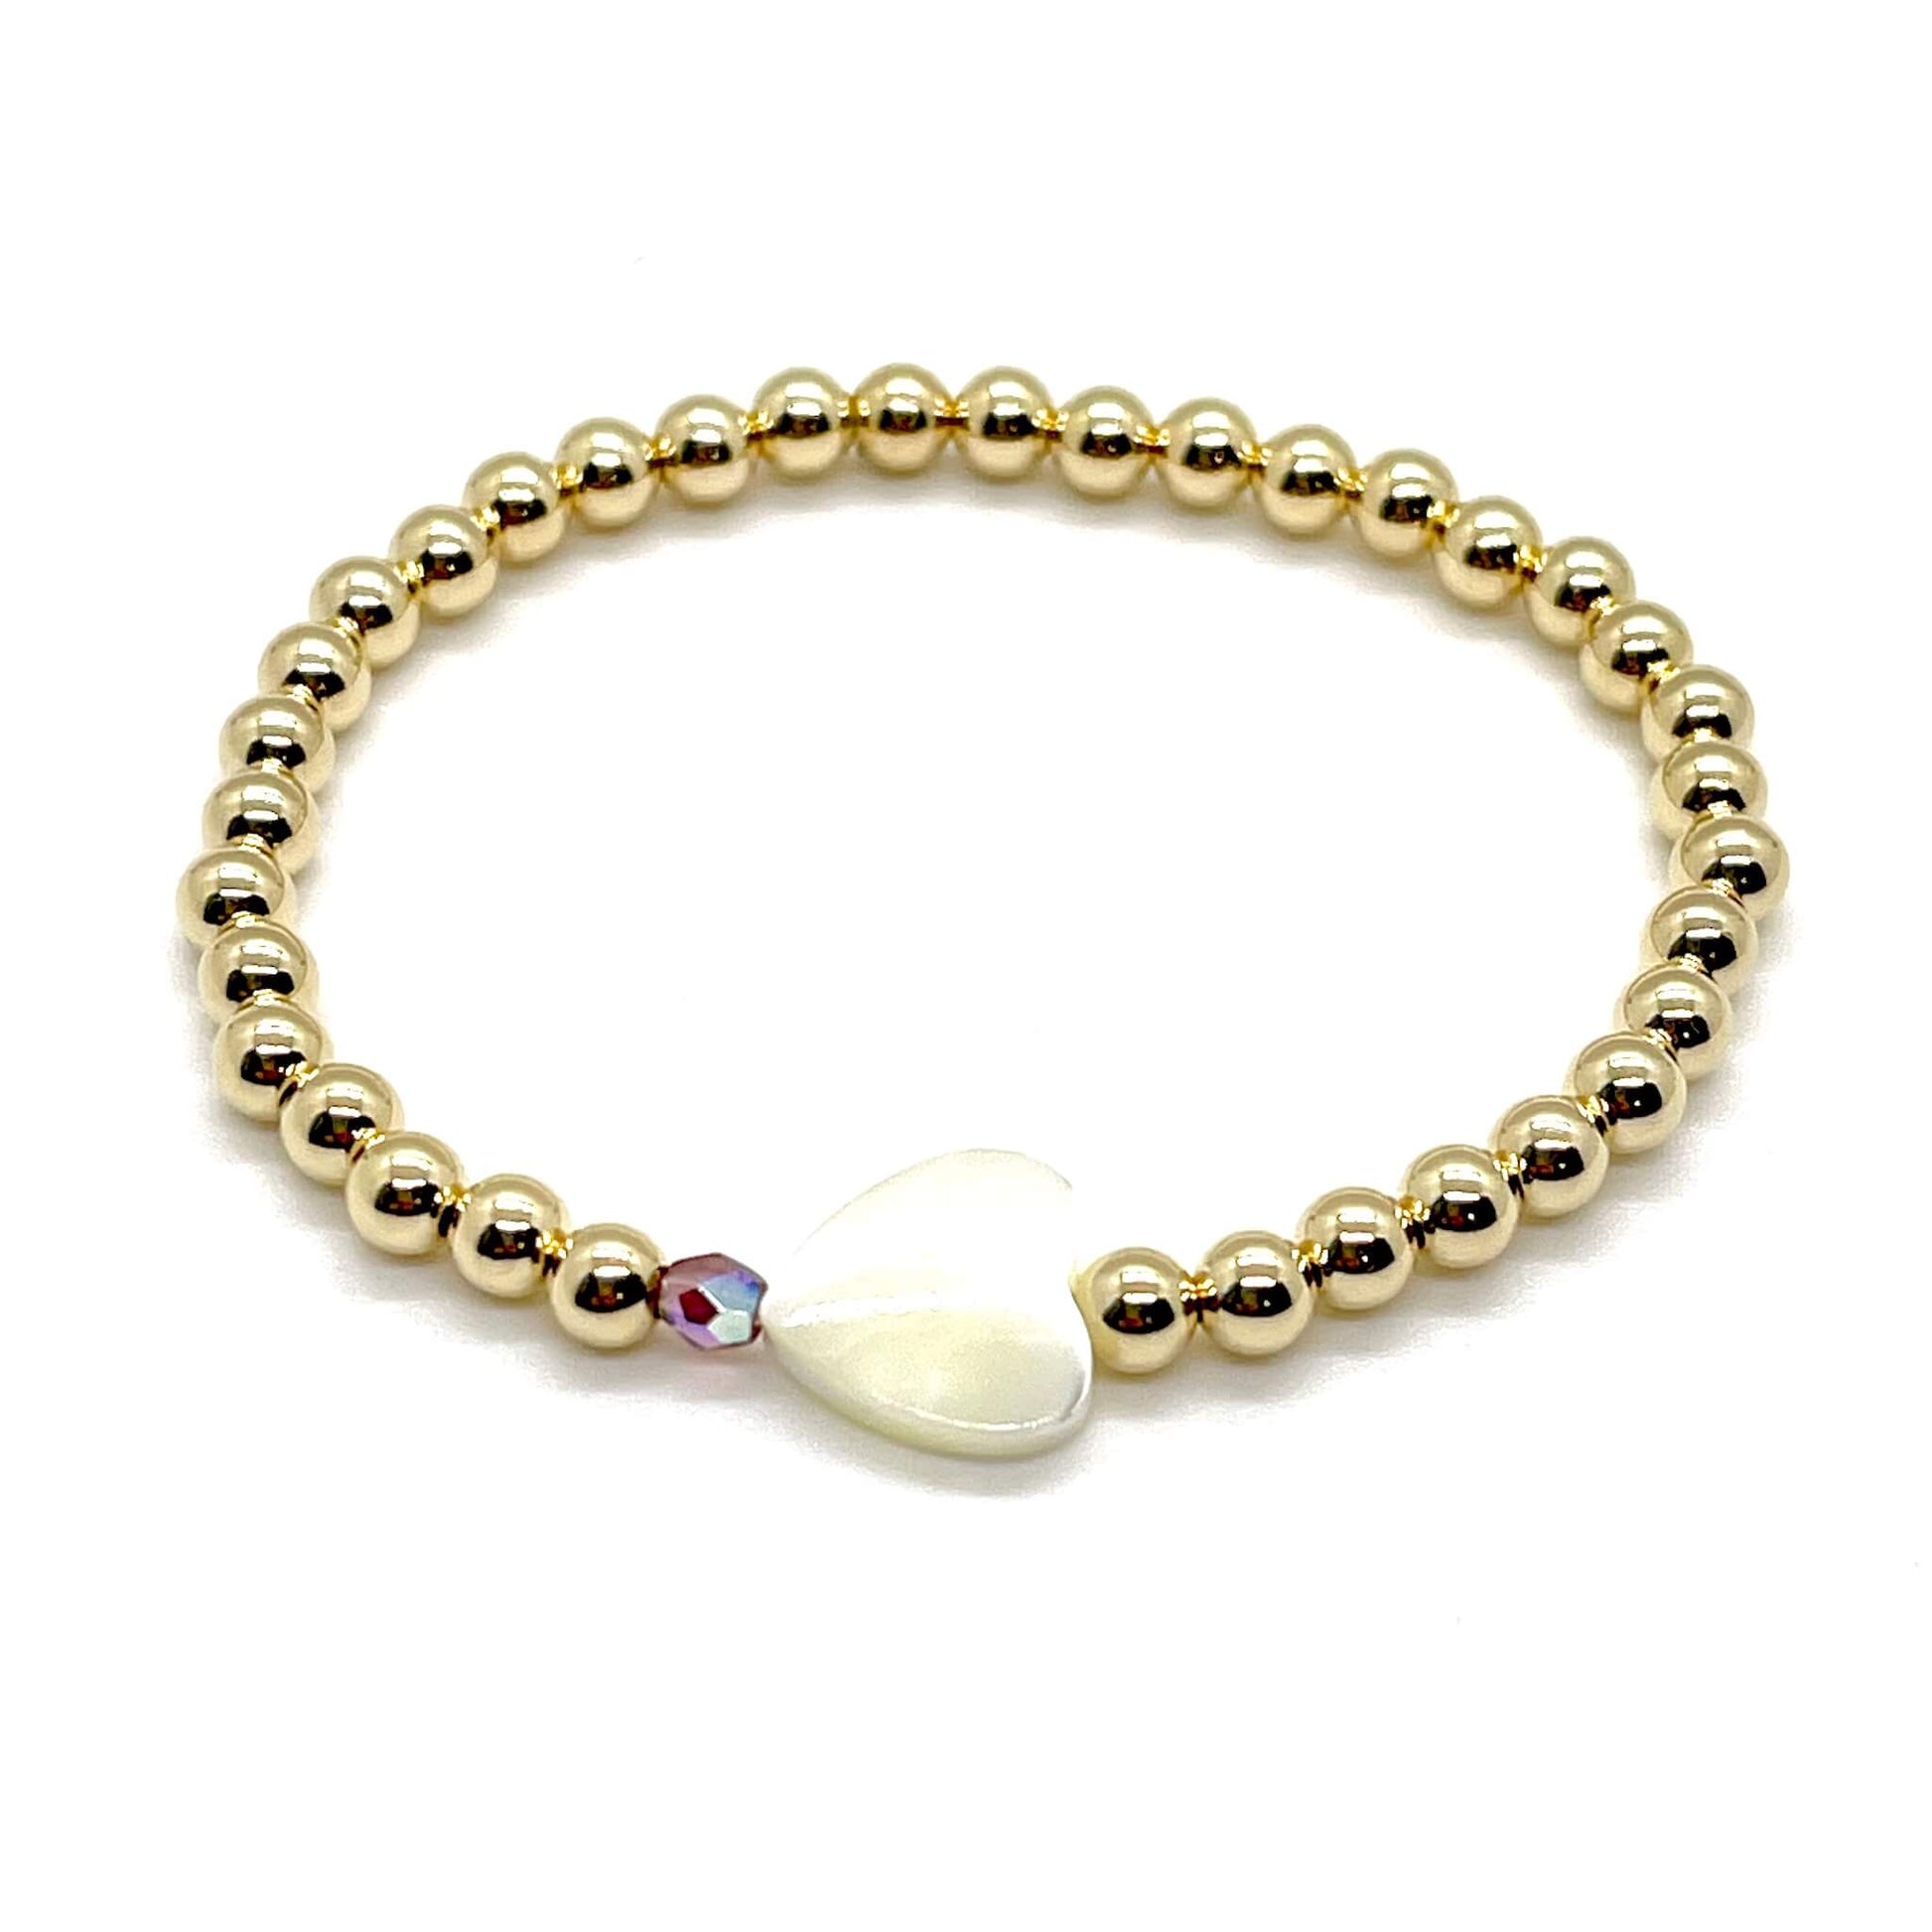 Gold heart bracelet with a mother-of-pearl heart, a small faceted amethyst crystal, and 4mm 14K gold filled beads.